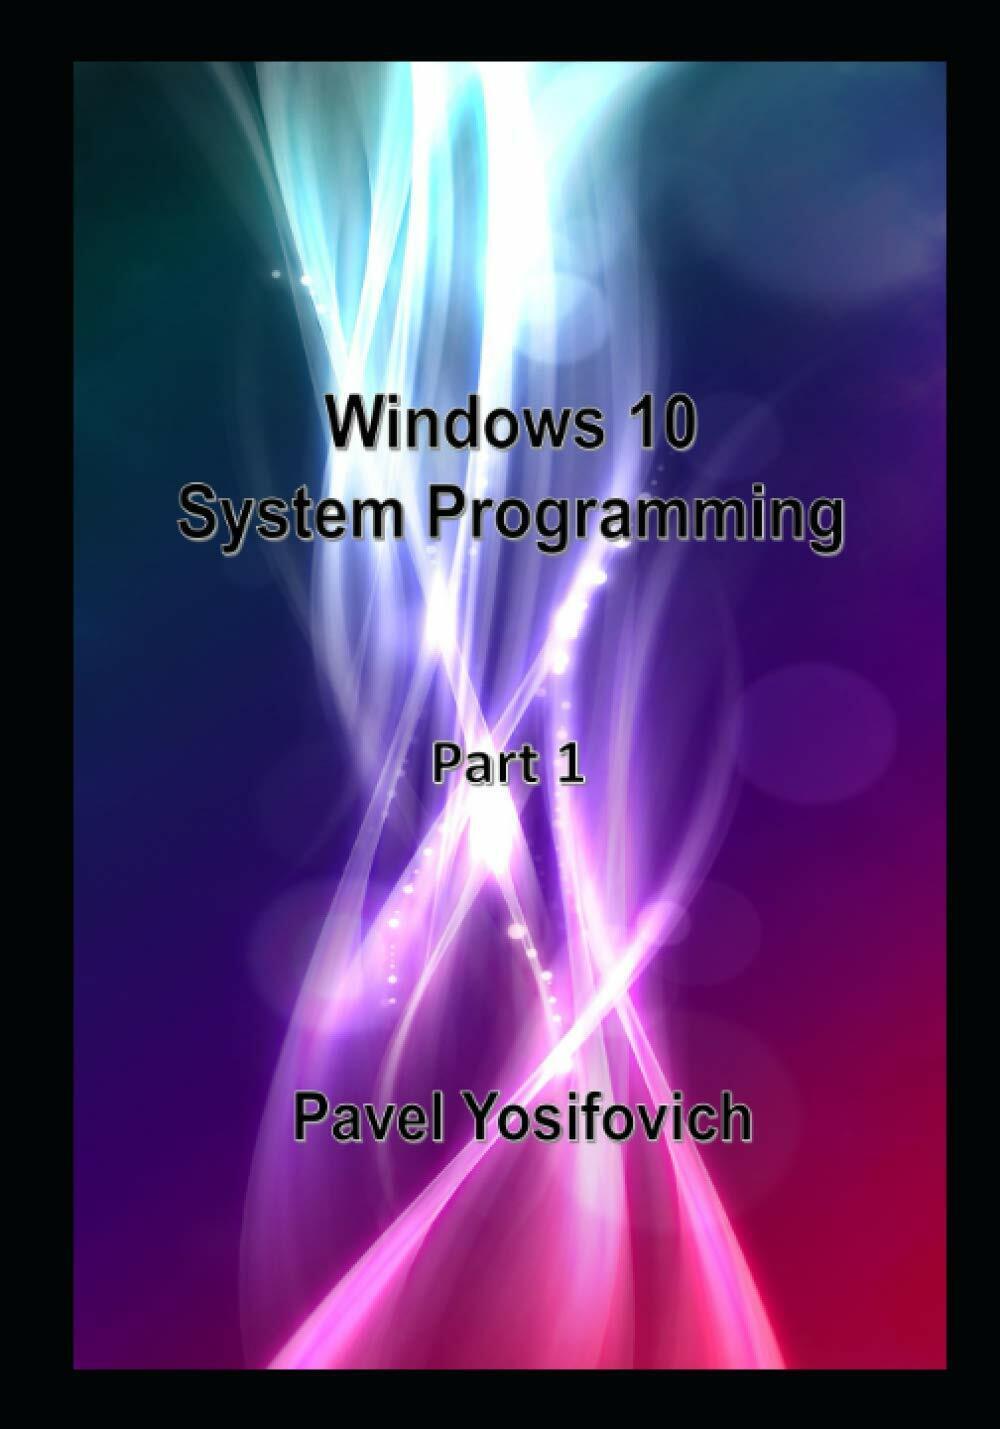 Windows 10 System Programming, Part 1 di Pavel Yosifovich,  2020,  Indipendently